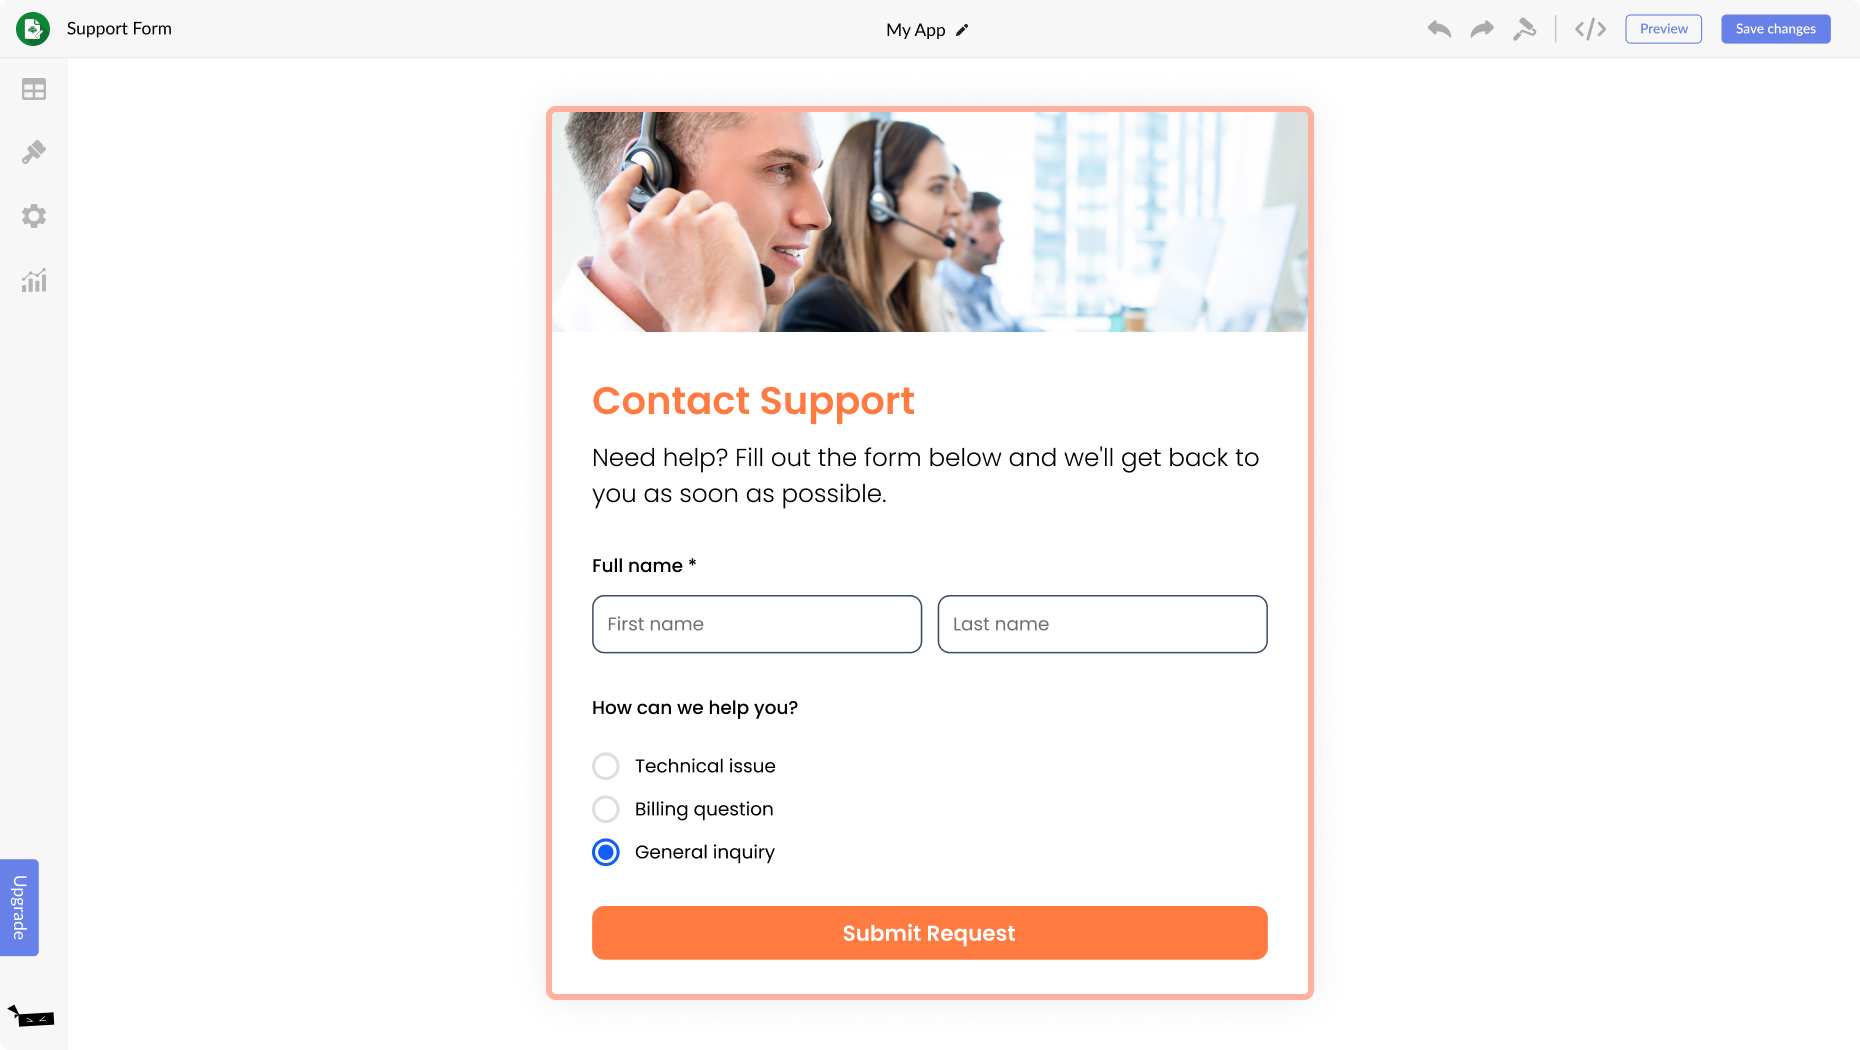 Support Form for Brightspot